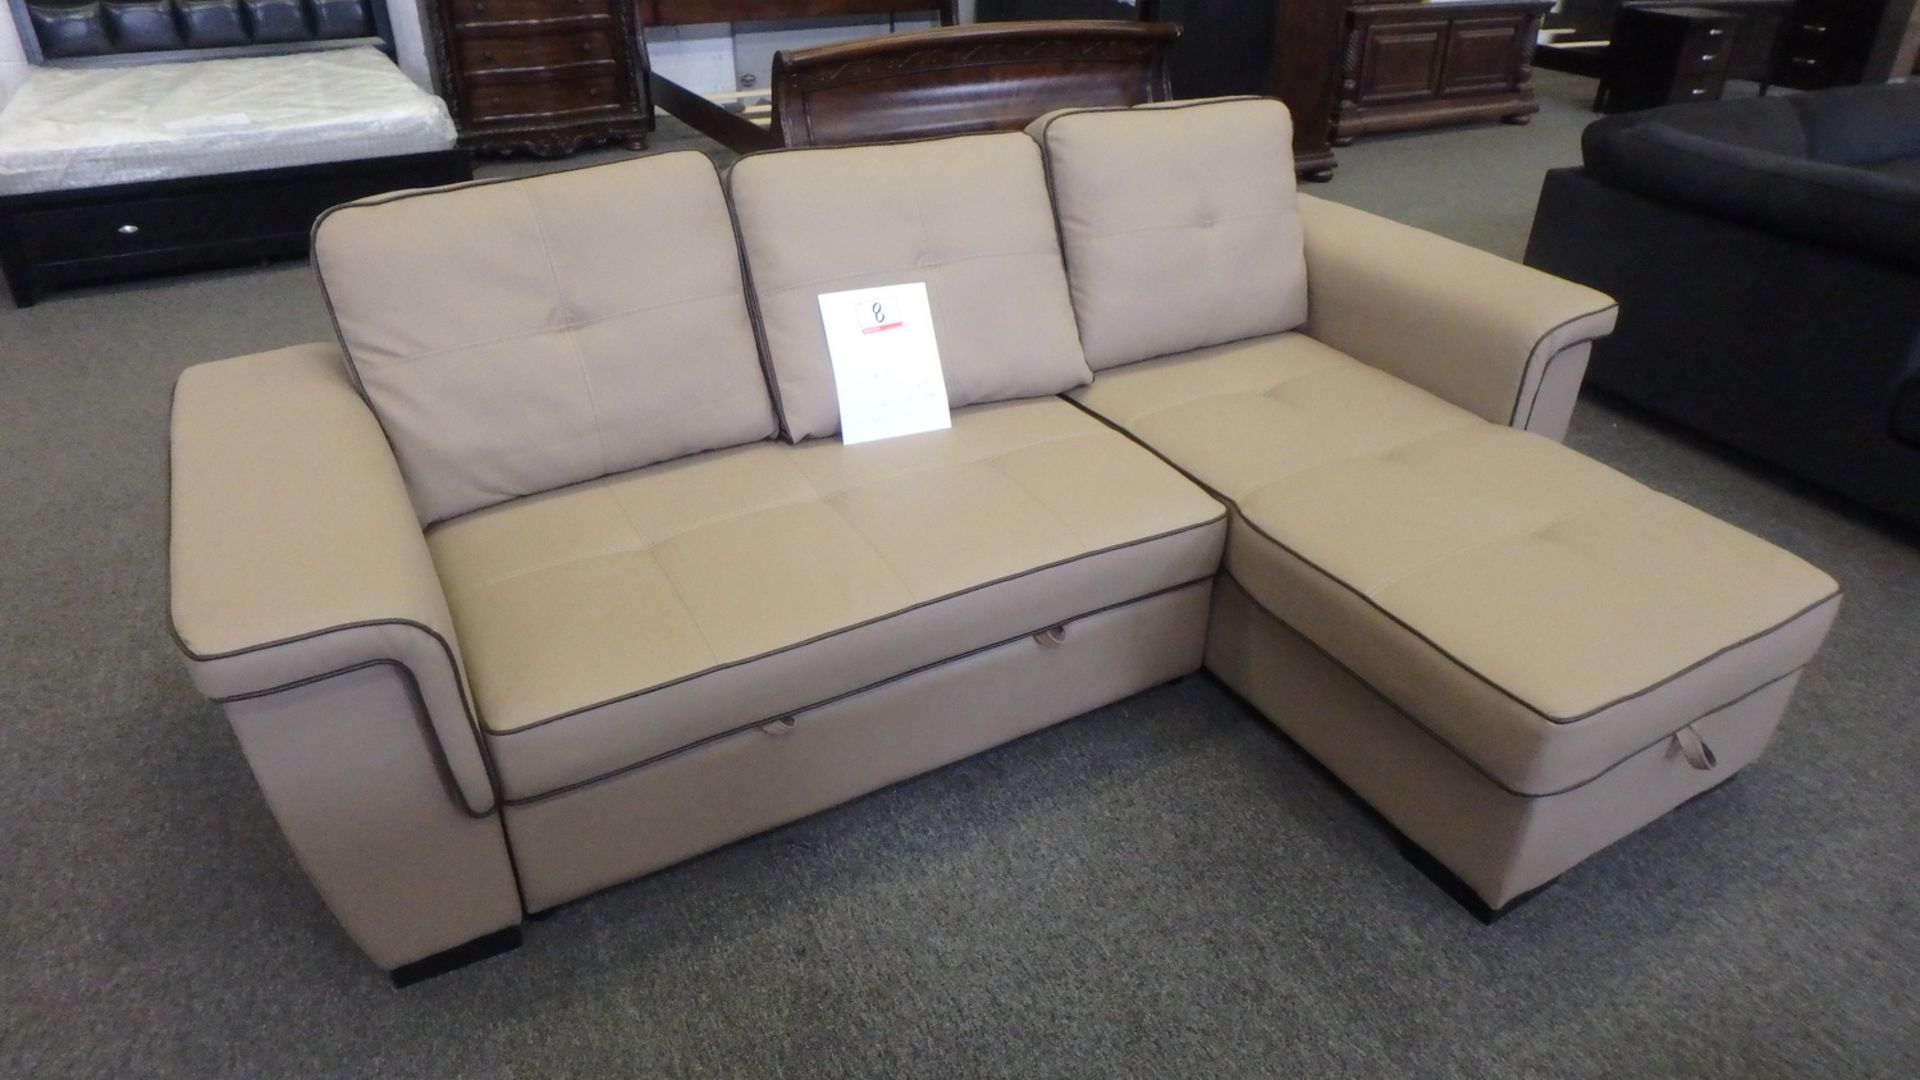 LATTE BROWN PU LEATHER SOFA / CONVERTIBLE BED C/W STORAGE CHAISE (LK-BEATRICE) (NEW IN BOX)